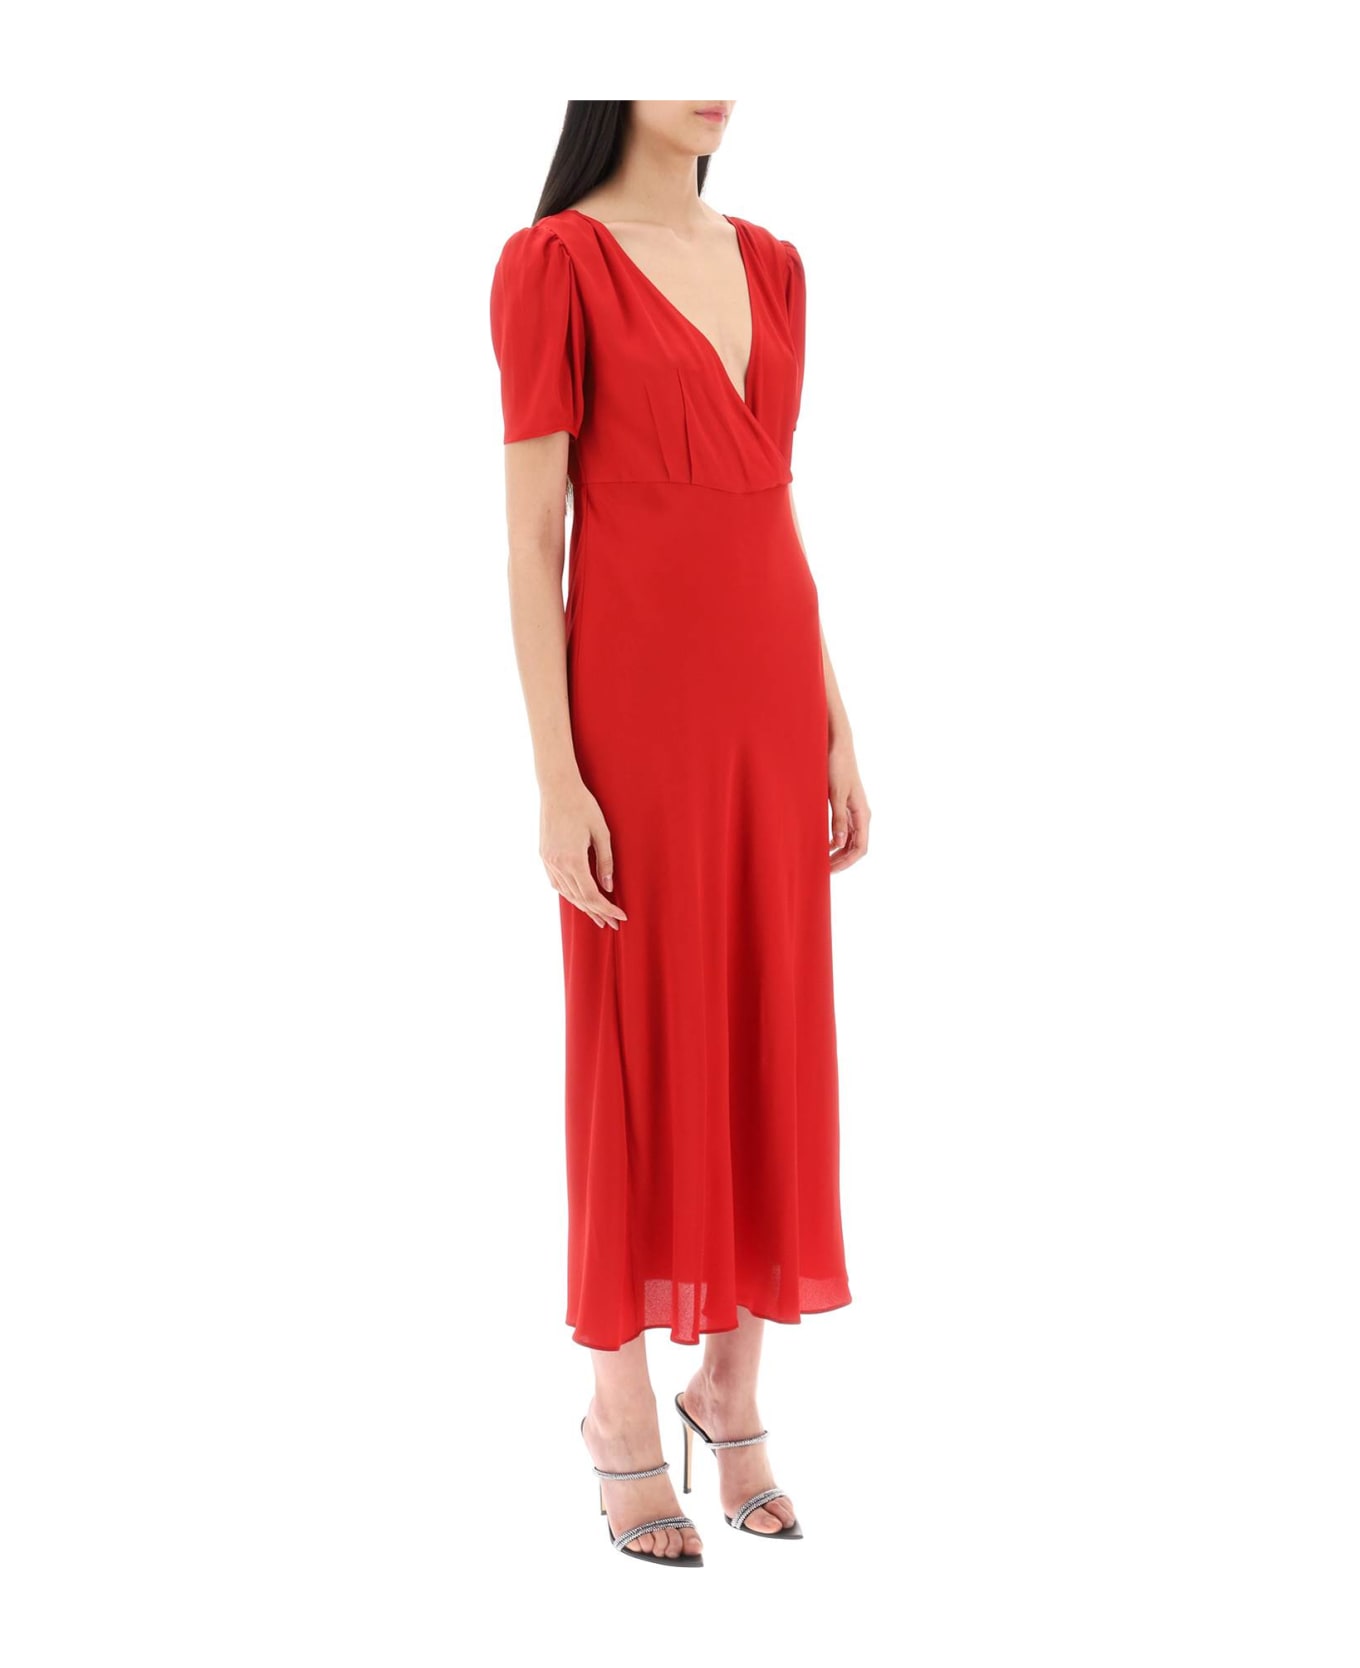 N.21 Crepe Midi Dress - ROSSO (Red)